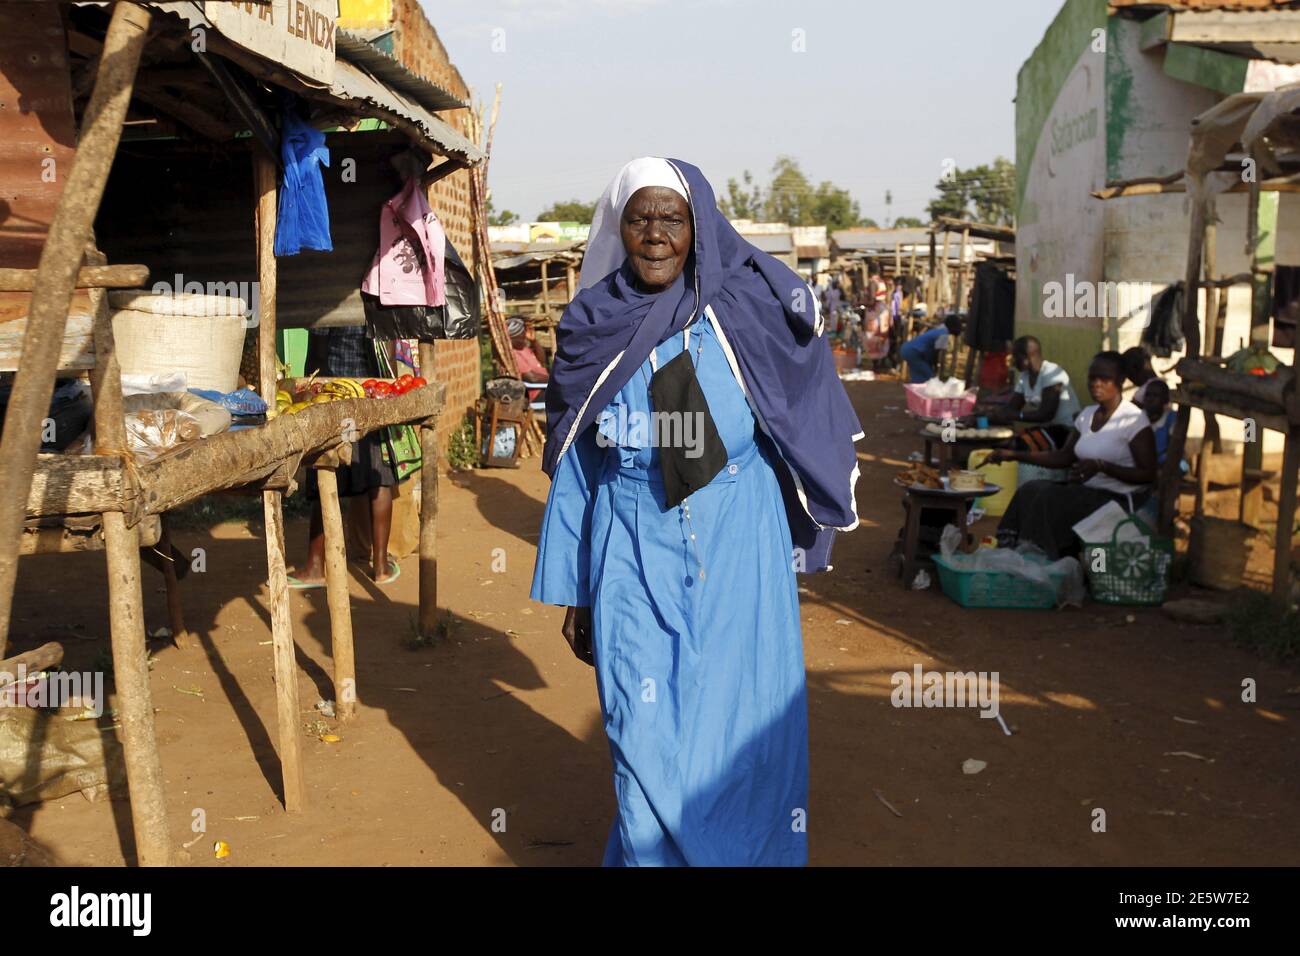 Clementina Auma Ojwang, a religious leader of the Legio Maria - a Spirit Initiated Church, walks at the trading centre the U.S. President Barack Obama's ancestral village of Nyang'oma Kogelo, west of Kenya's capital Nairobi, July 15, 2015. Auma, 87, said we are proud of better roads, improved security, tarmac roads and business opportunities since Barack Obama became the U.S. President. 'The current challenge we are facing as the people of Nyang'oma Kogelo is quality education and access to financial capital' she added. President Obama visits Kenya and Ethiopia in July, his third major trip to Stock Photo